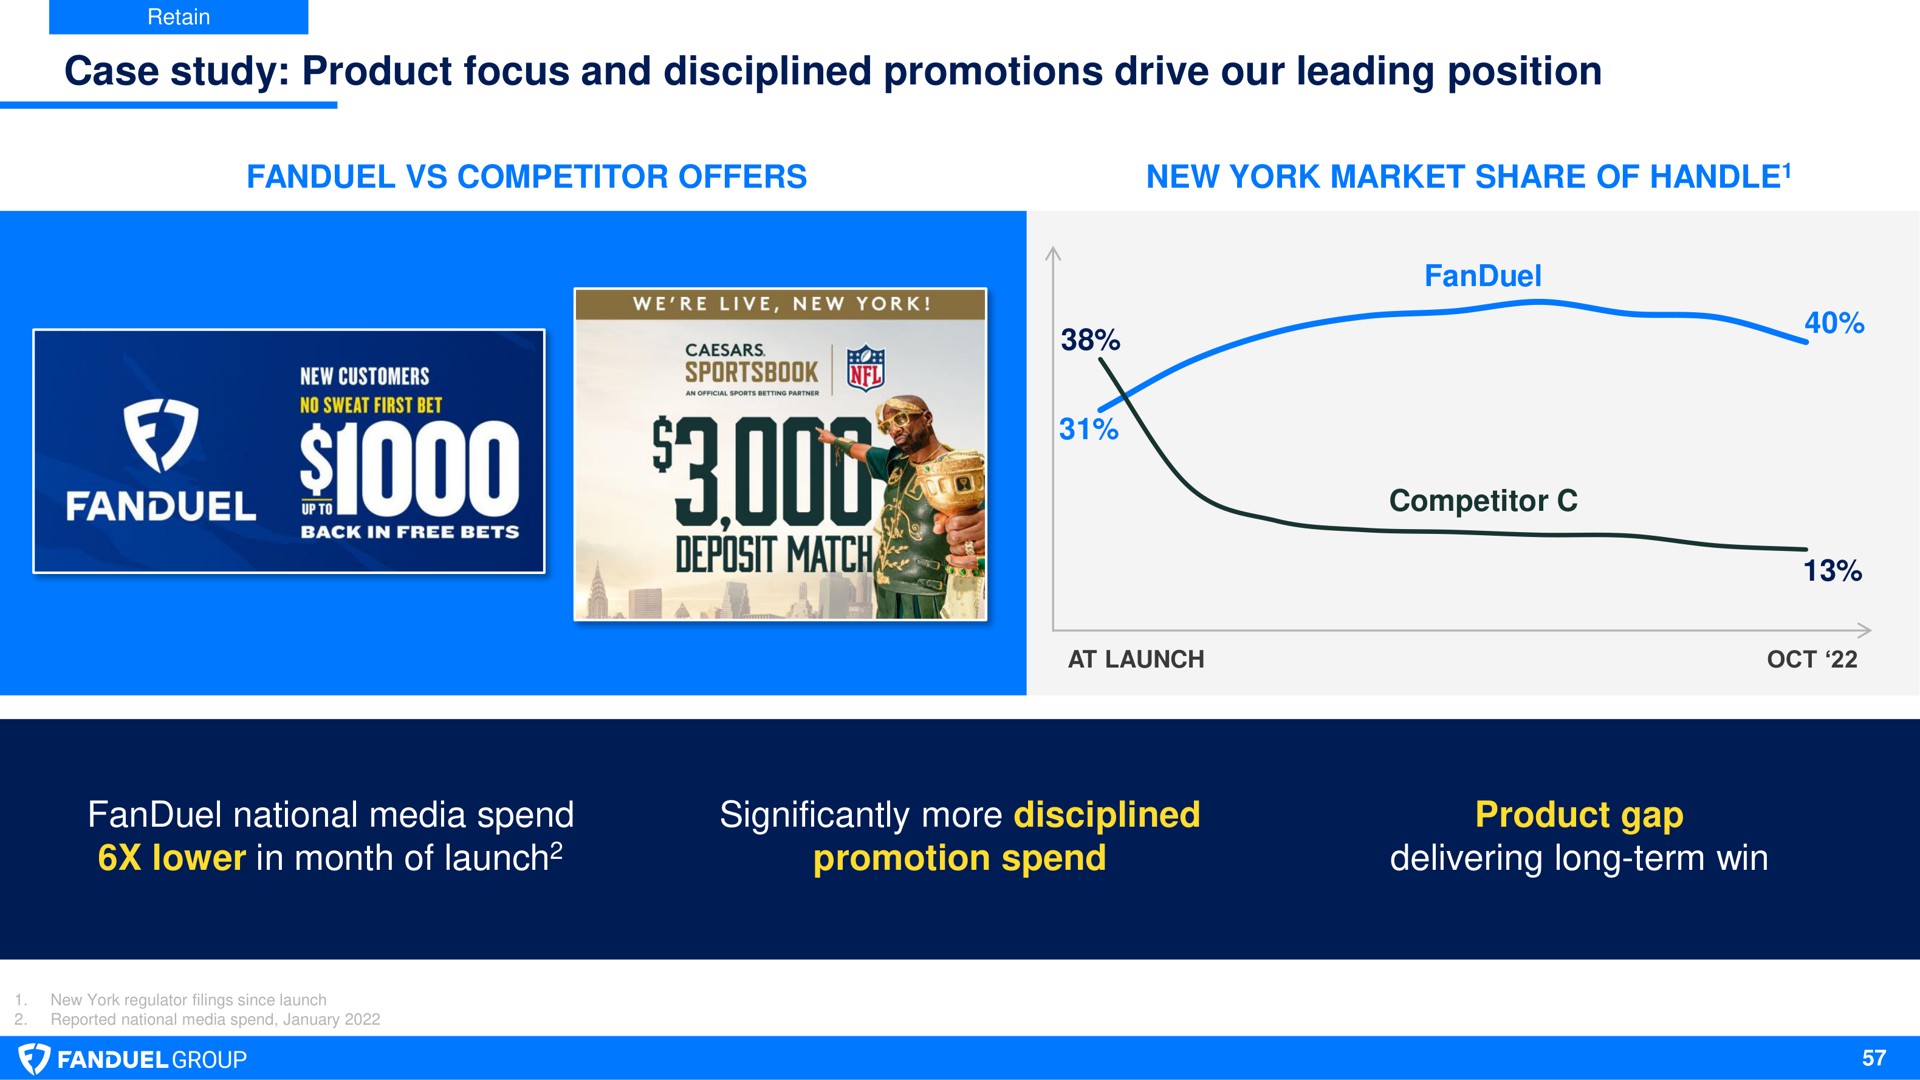 case study product focus and disciplined promotions drive our leading position national media spend lower in month of launch significantly more disciplined promotion spend product gap delivering long term win deposit match | Flutter